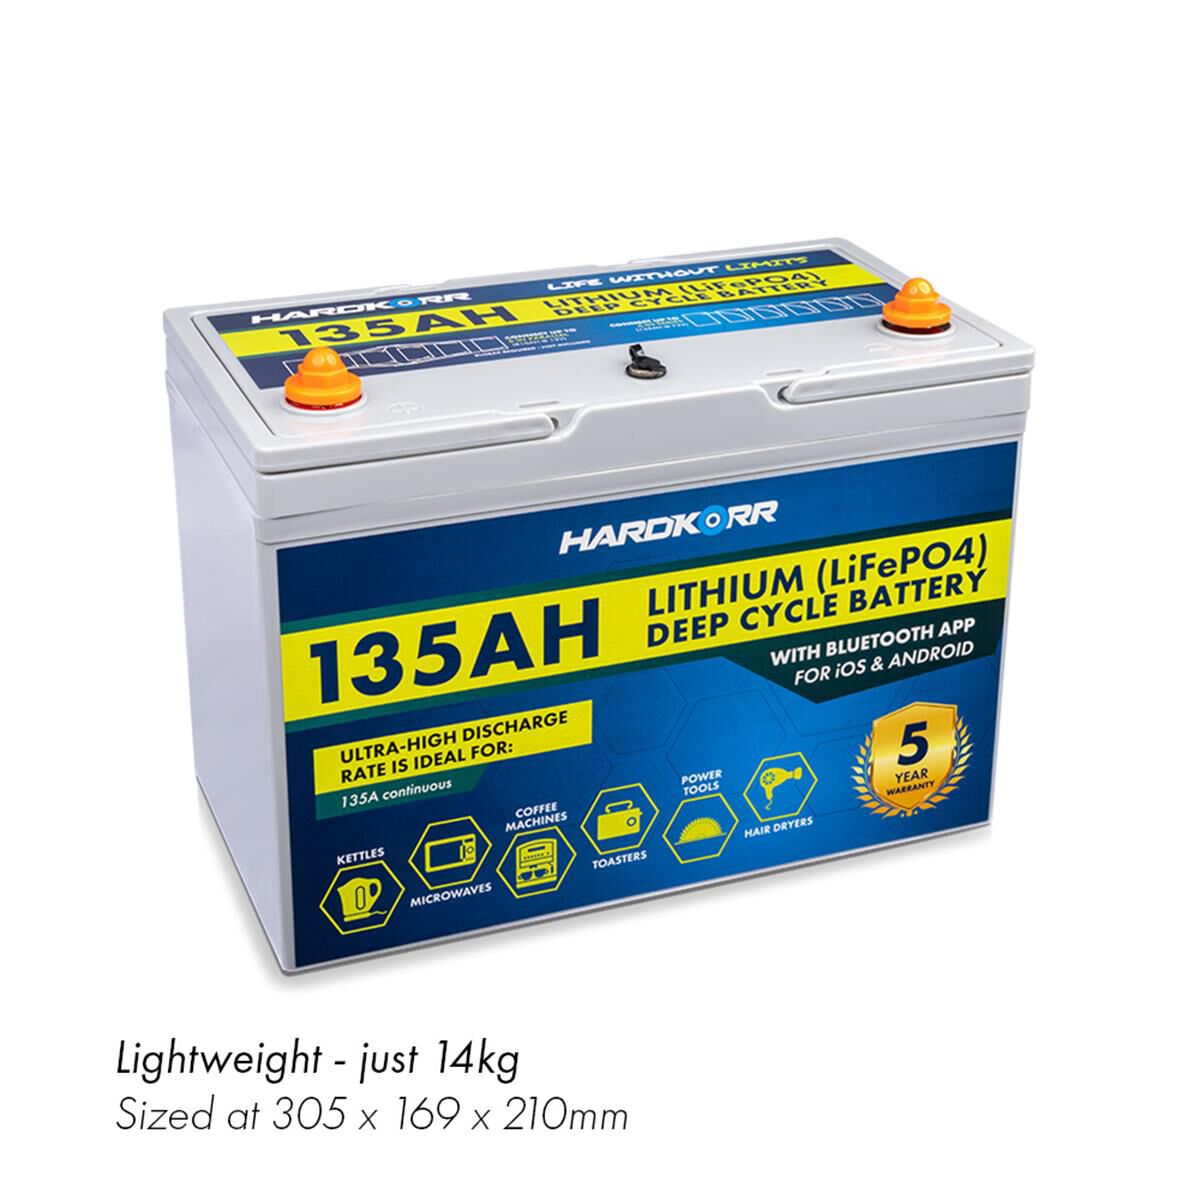 240AH COLD CLIMATE LITHIUM LIFEPO4 DEEP CYCLE BATTERY W/BLUETOOTH, , scaau_hi-res